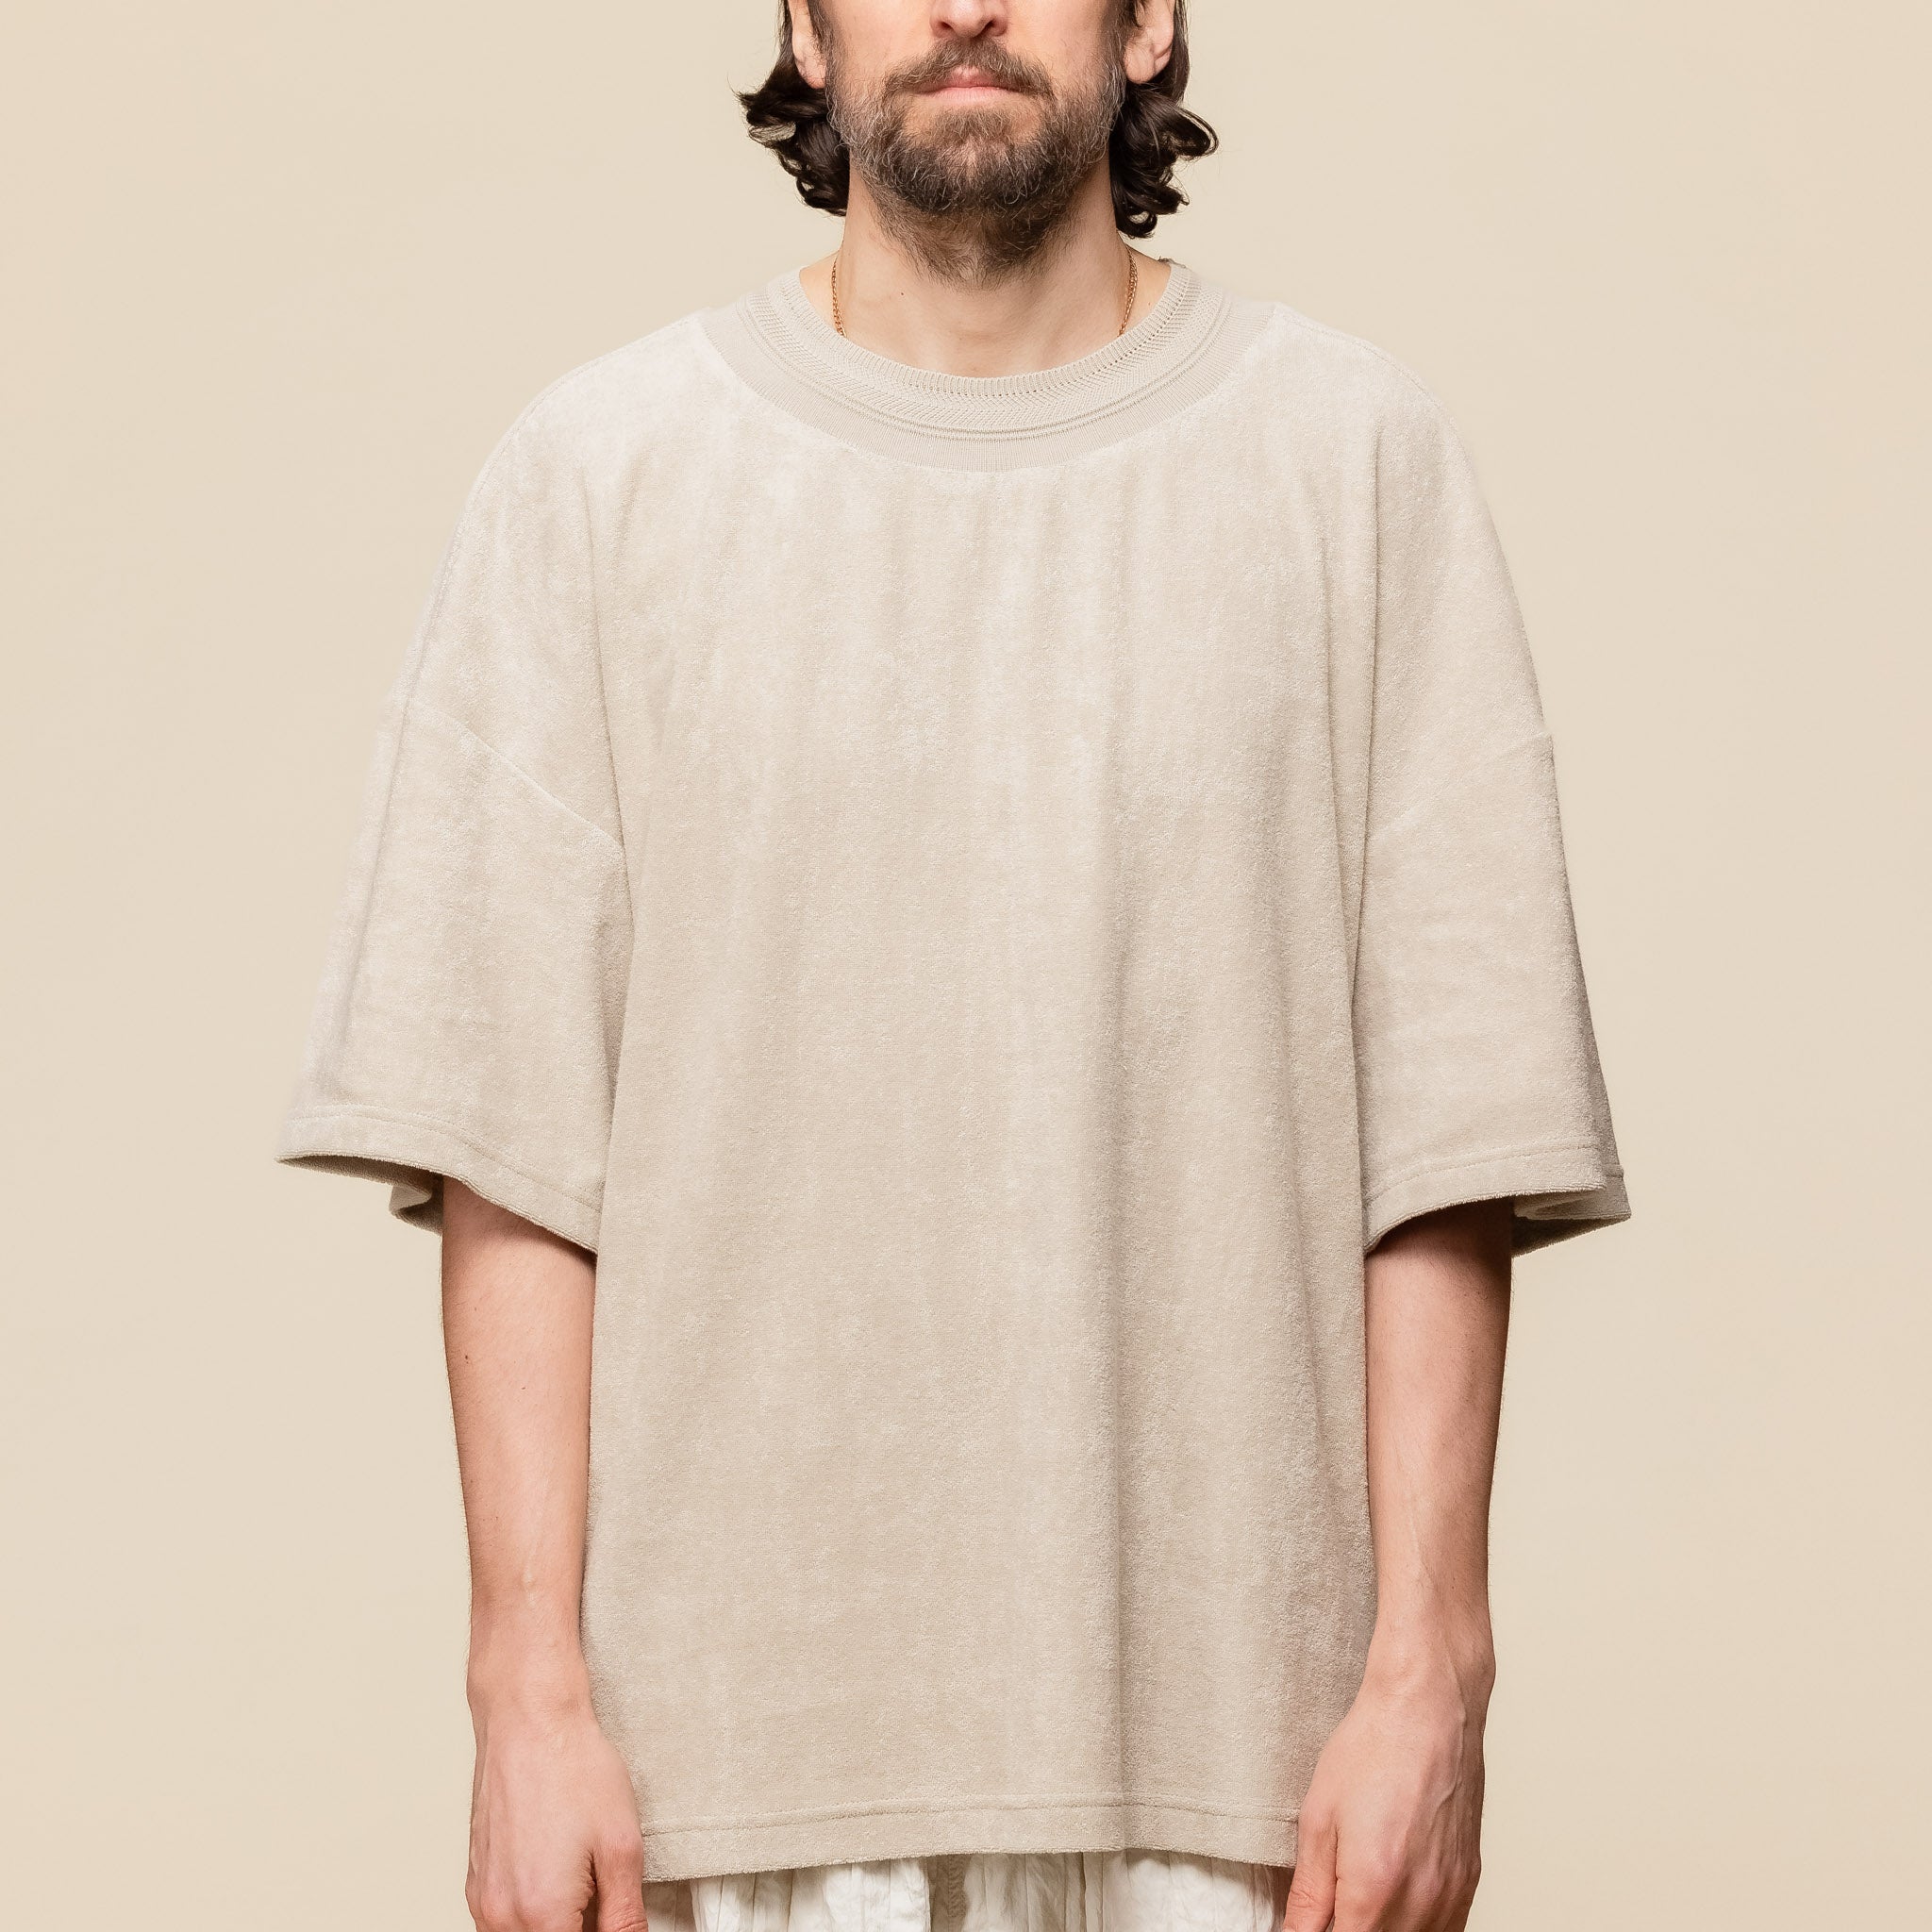 Merely Made - Hmong Den Wide Roundneck T-shirt - Sand Beige 24SML242TS "merely made website" "merely made stockist"